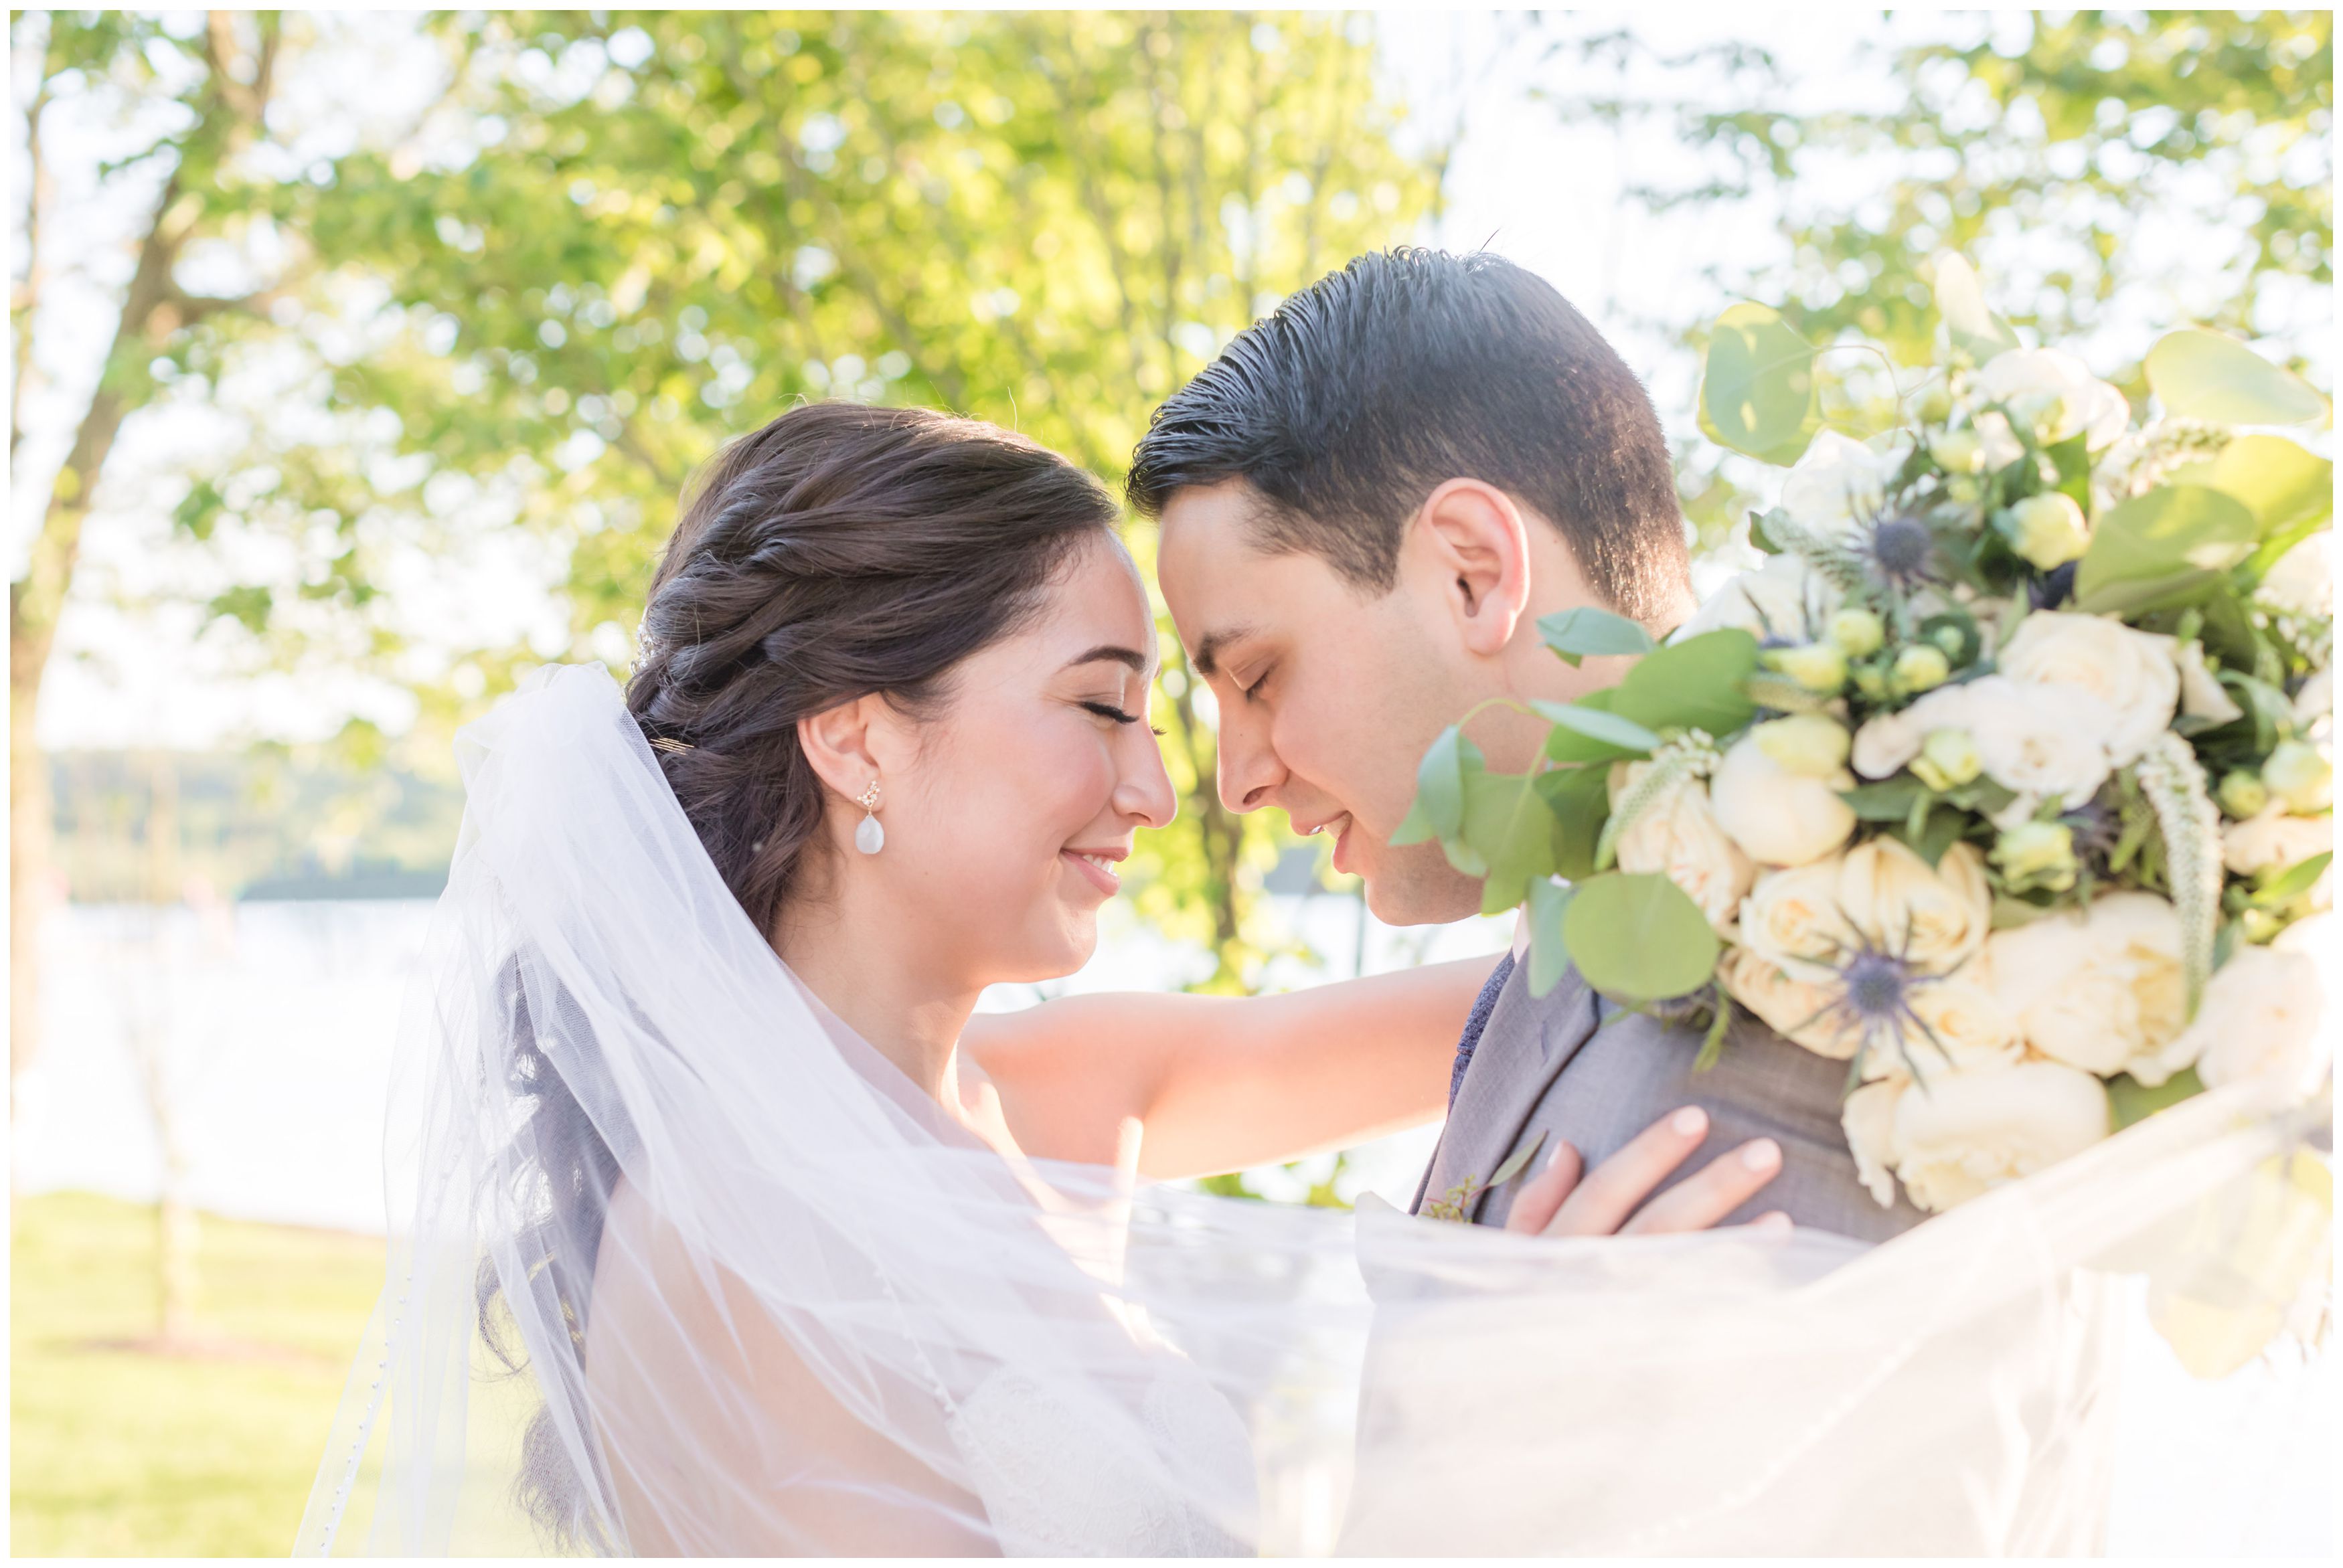 Bride and groom portraits at outdoor lakeside wedding